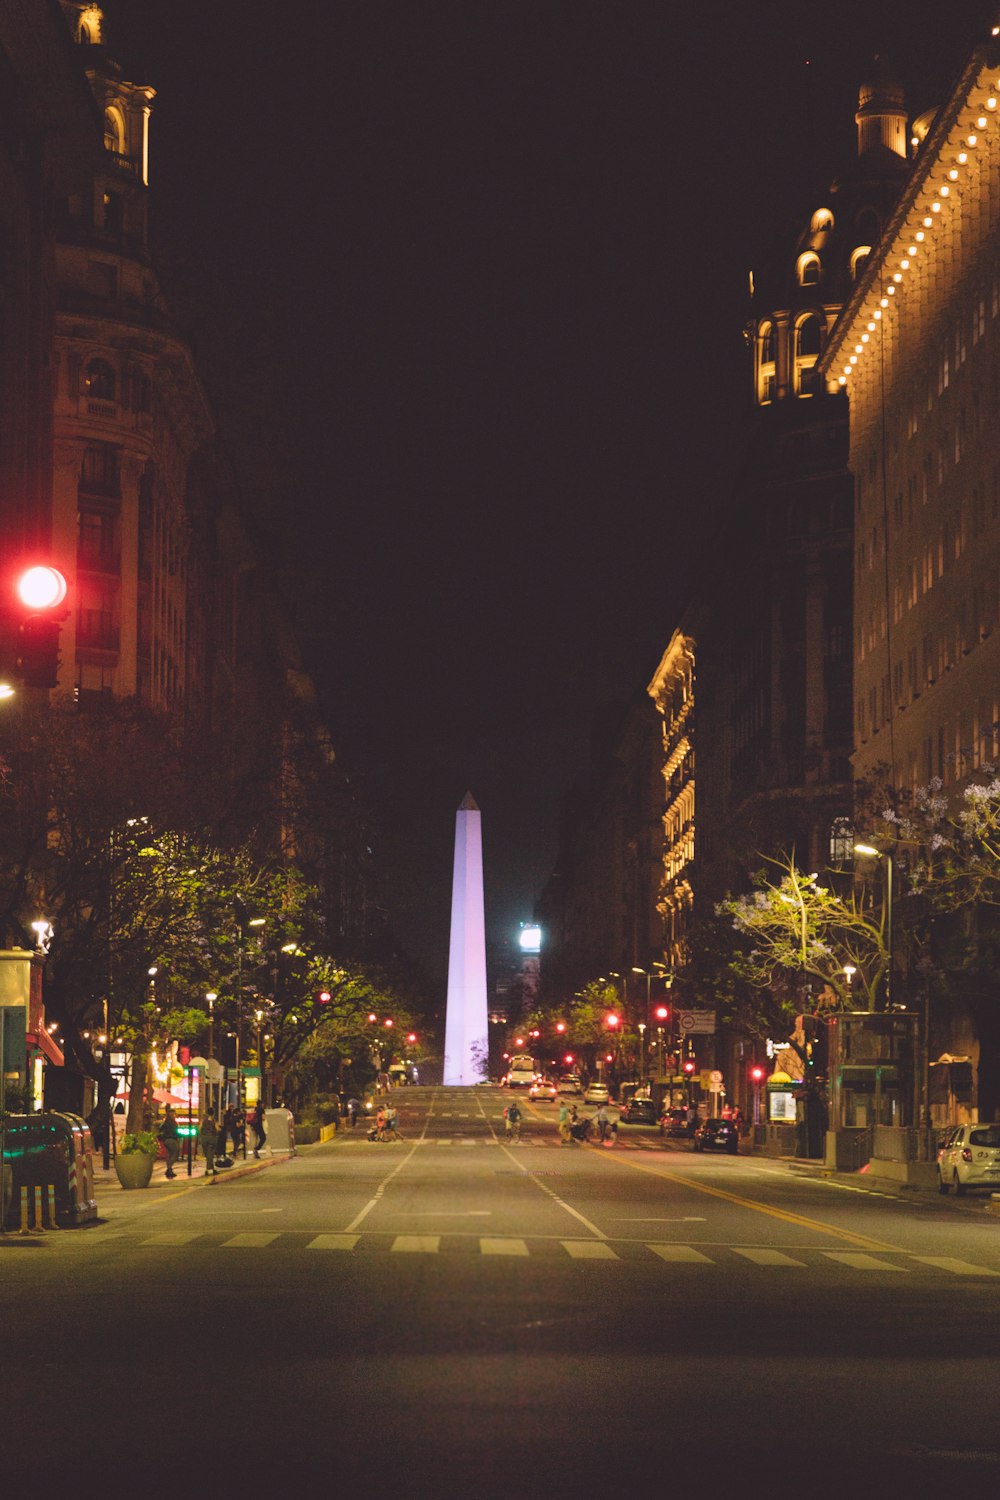 a city street at night with a tall obelisk in the background